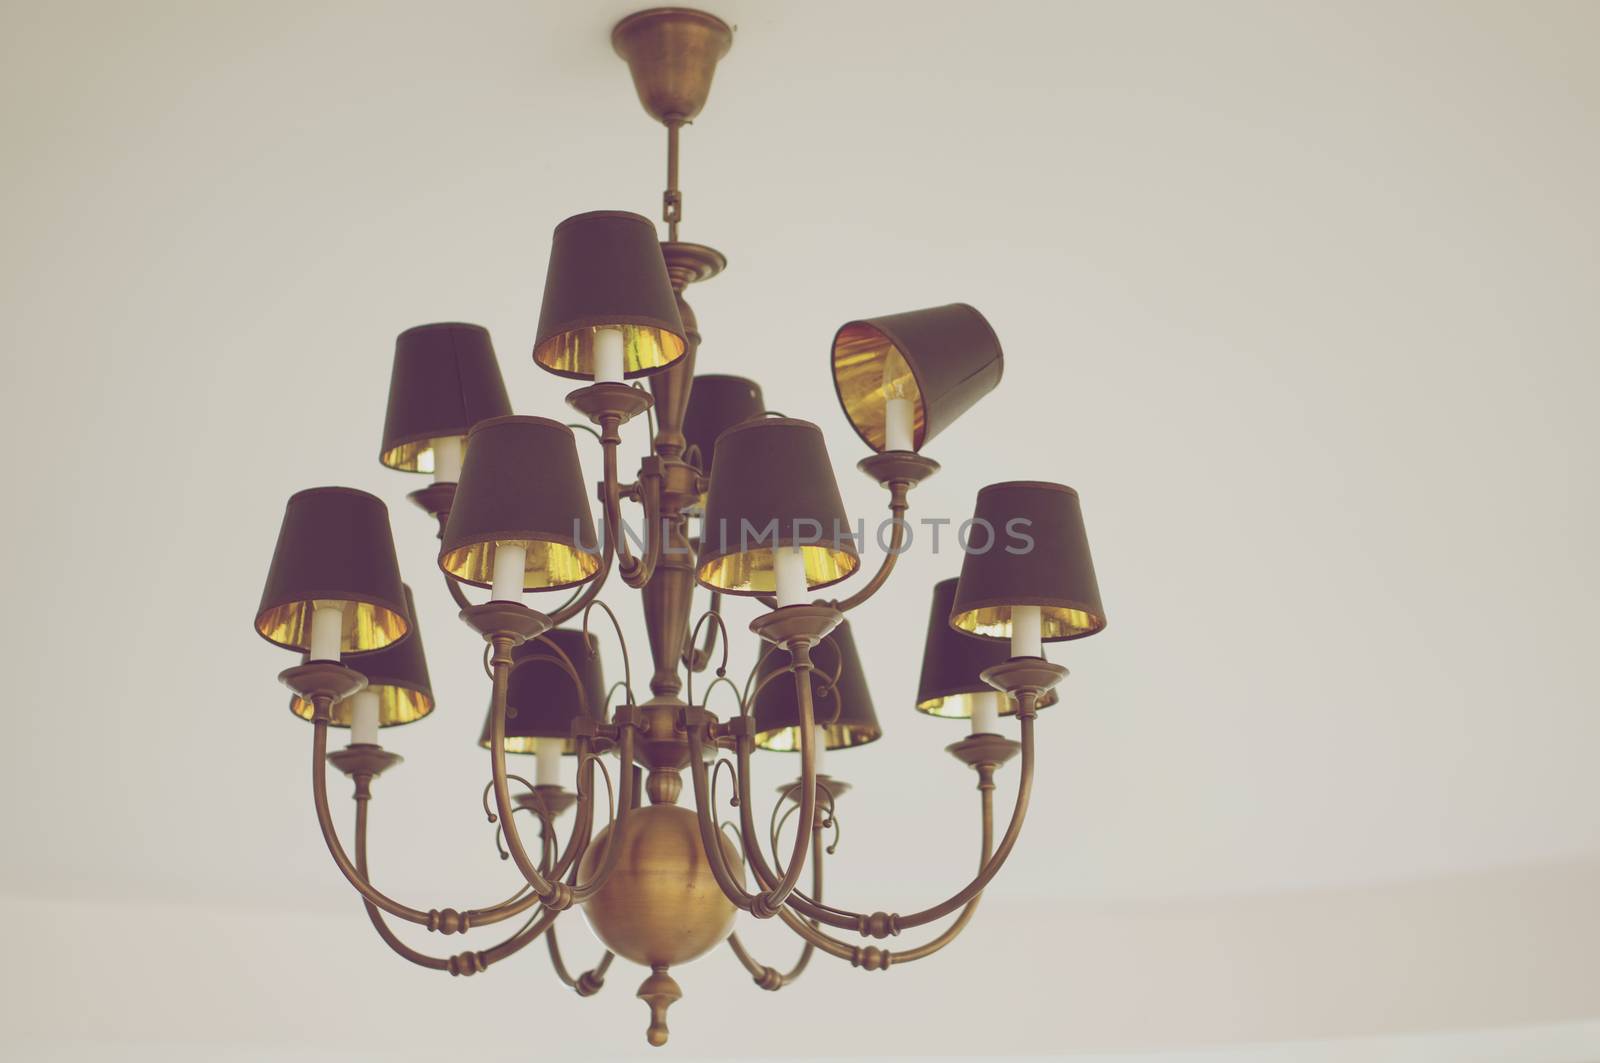 Chandelier on white ceiling in vintage style by eaglesky